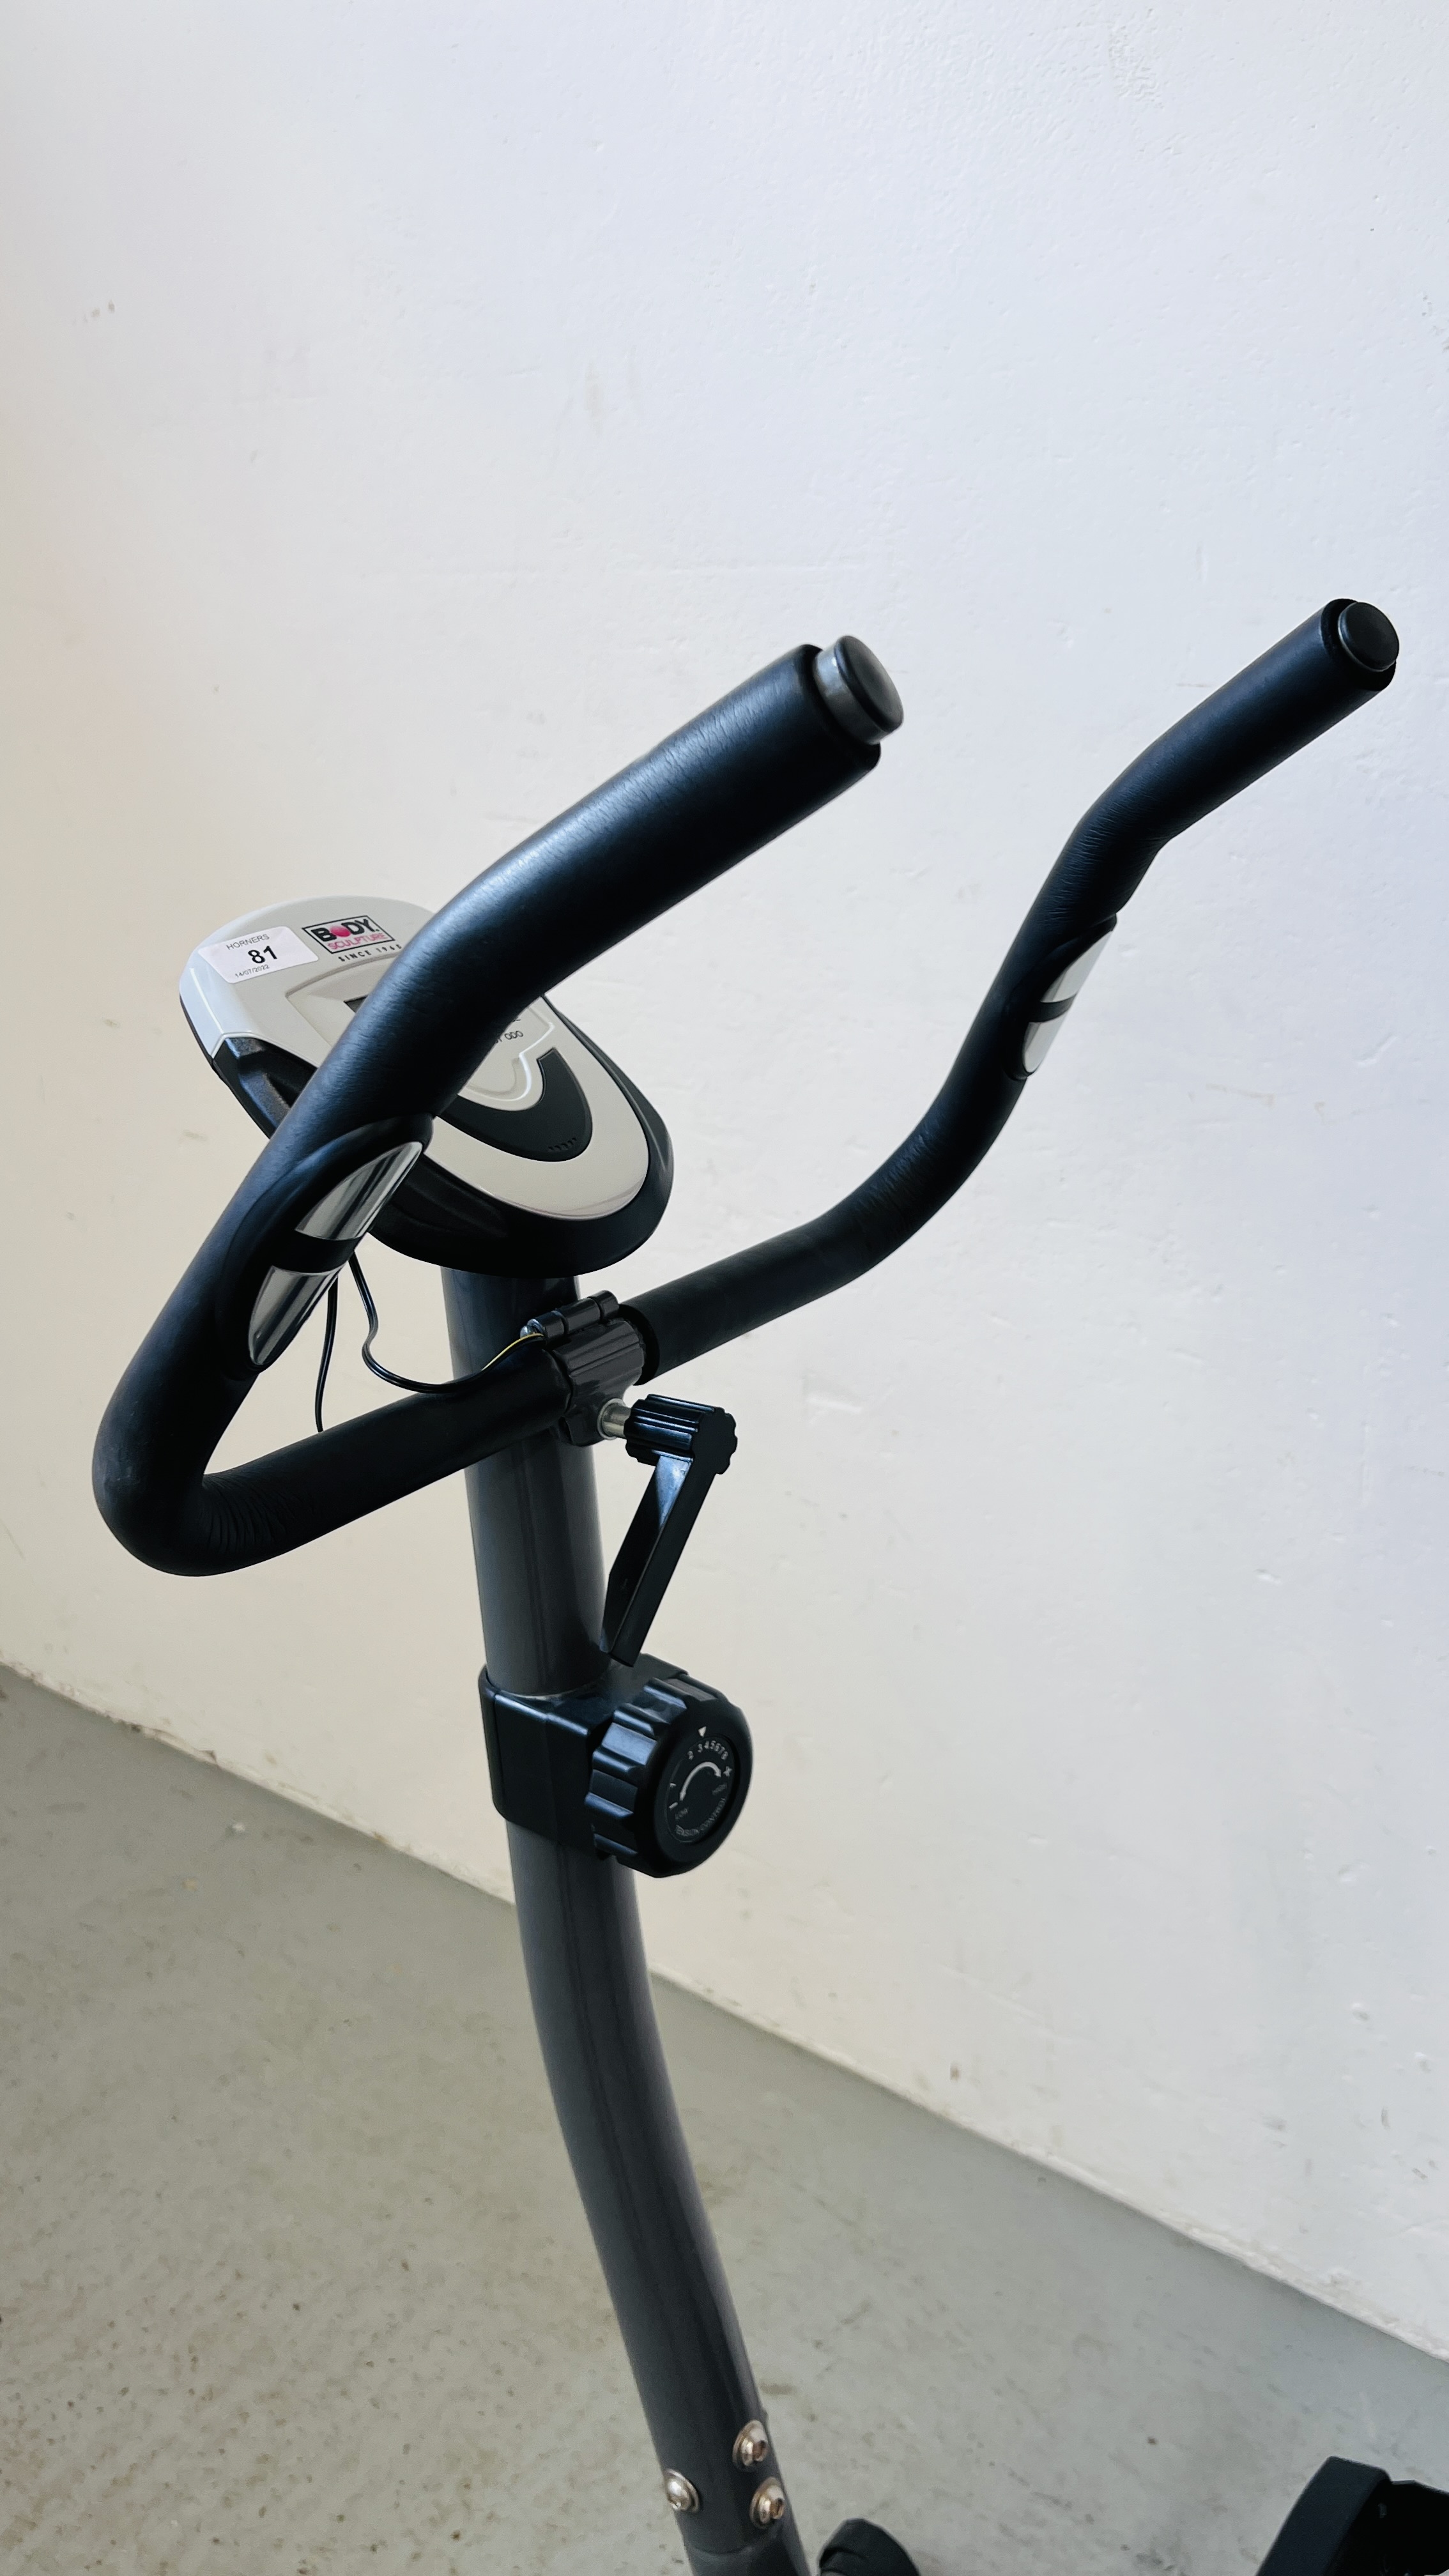 A BODY SCULPTURE SMART EXERCISE BIKE BC-1700 WITH VARIOUS EXERCISE TENSIONS AND DIGITAL DISPLAY - - Image 3 of 6